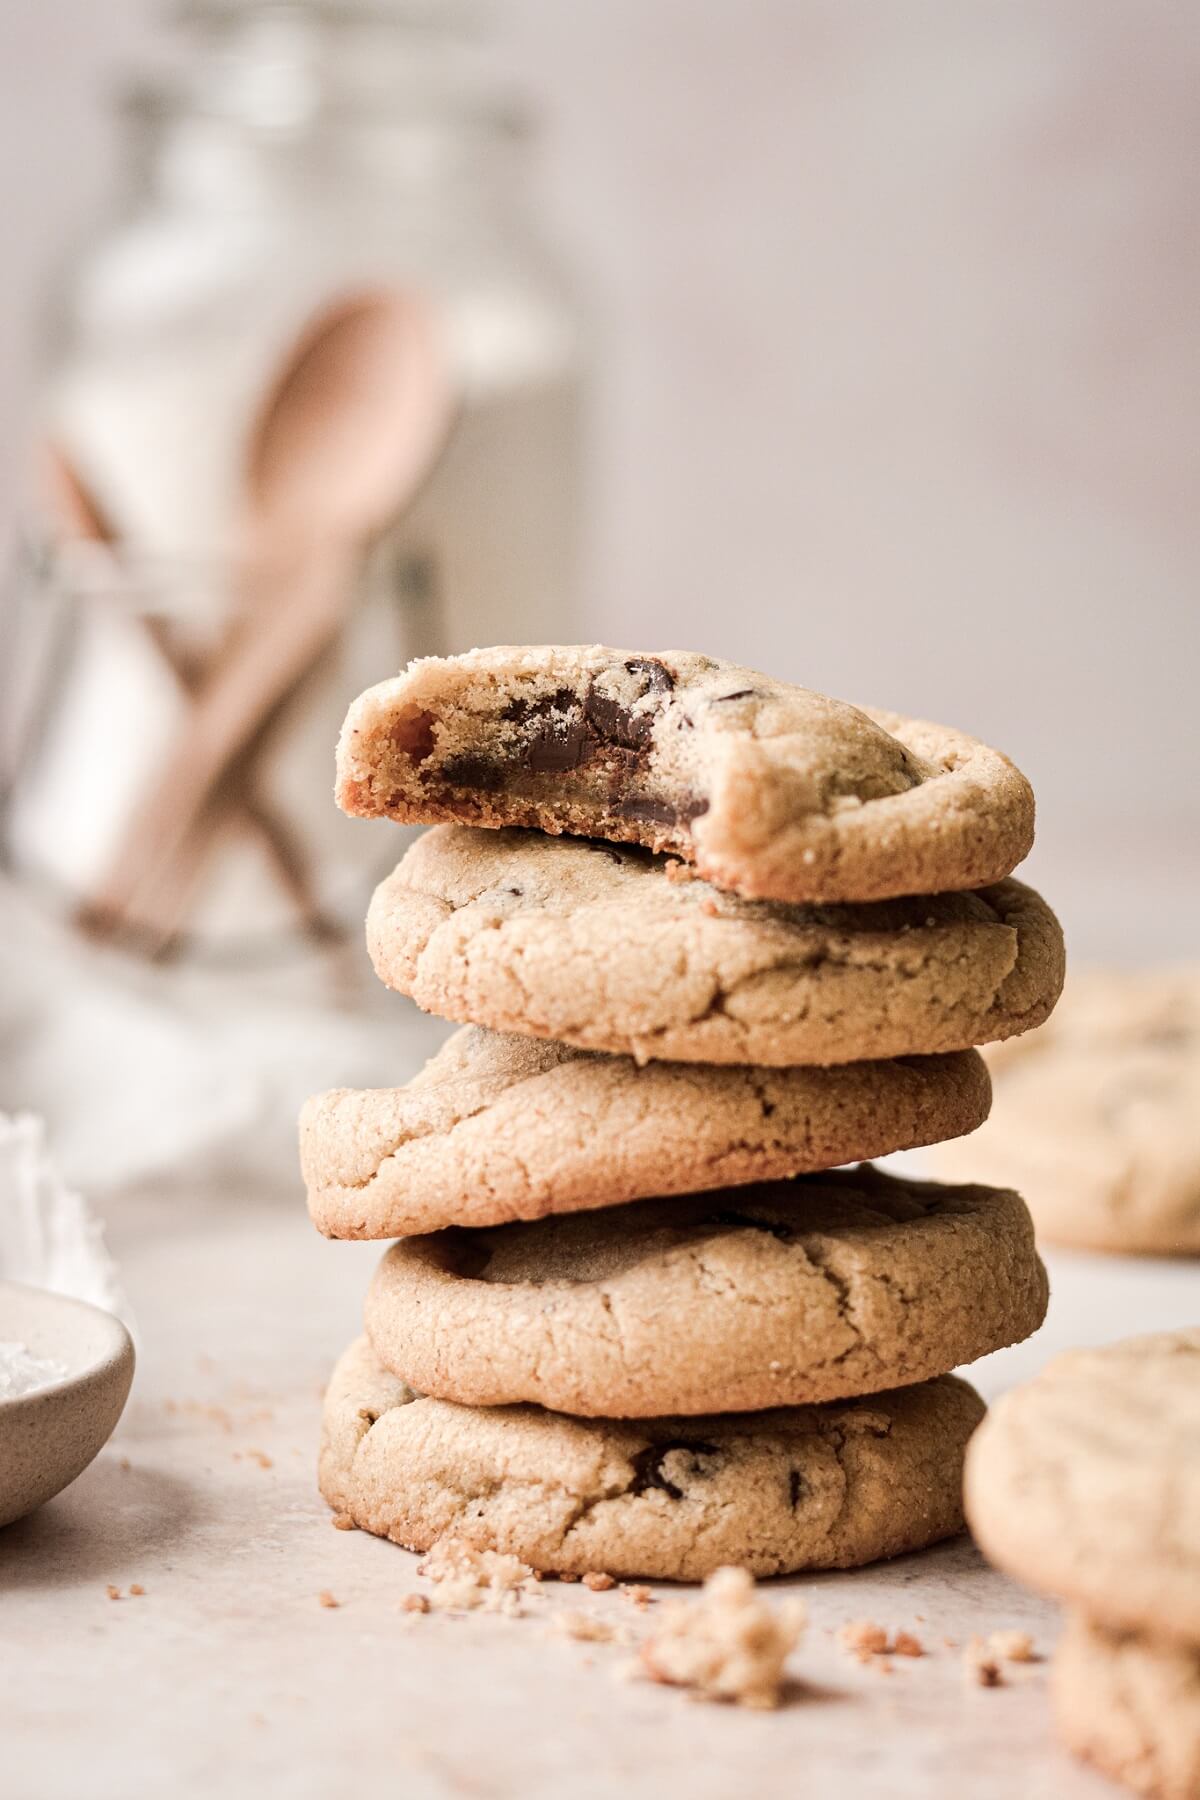 A stack of rye chocolate chip cookies, one with a bite taken.